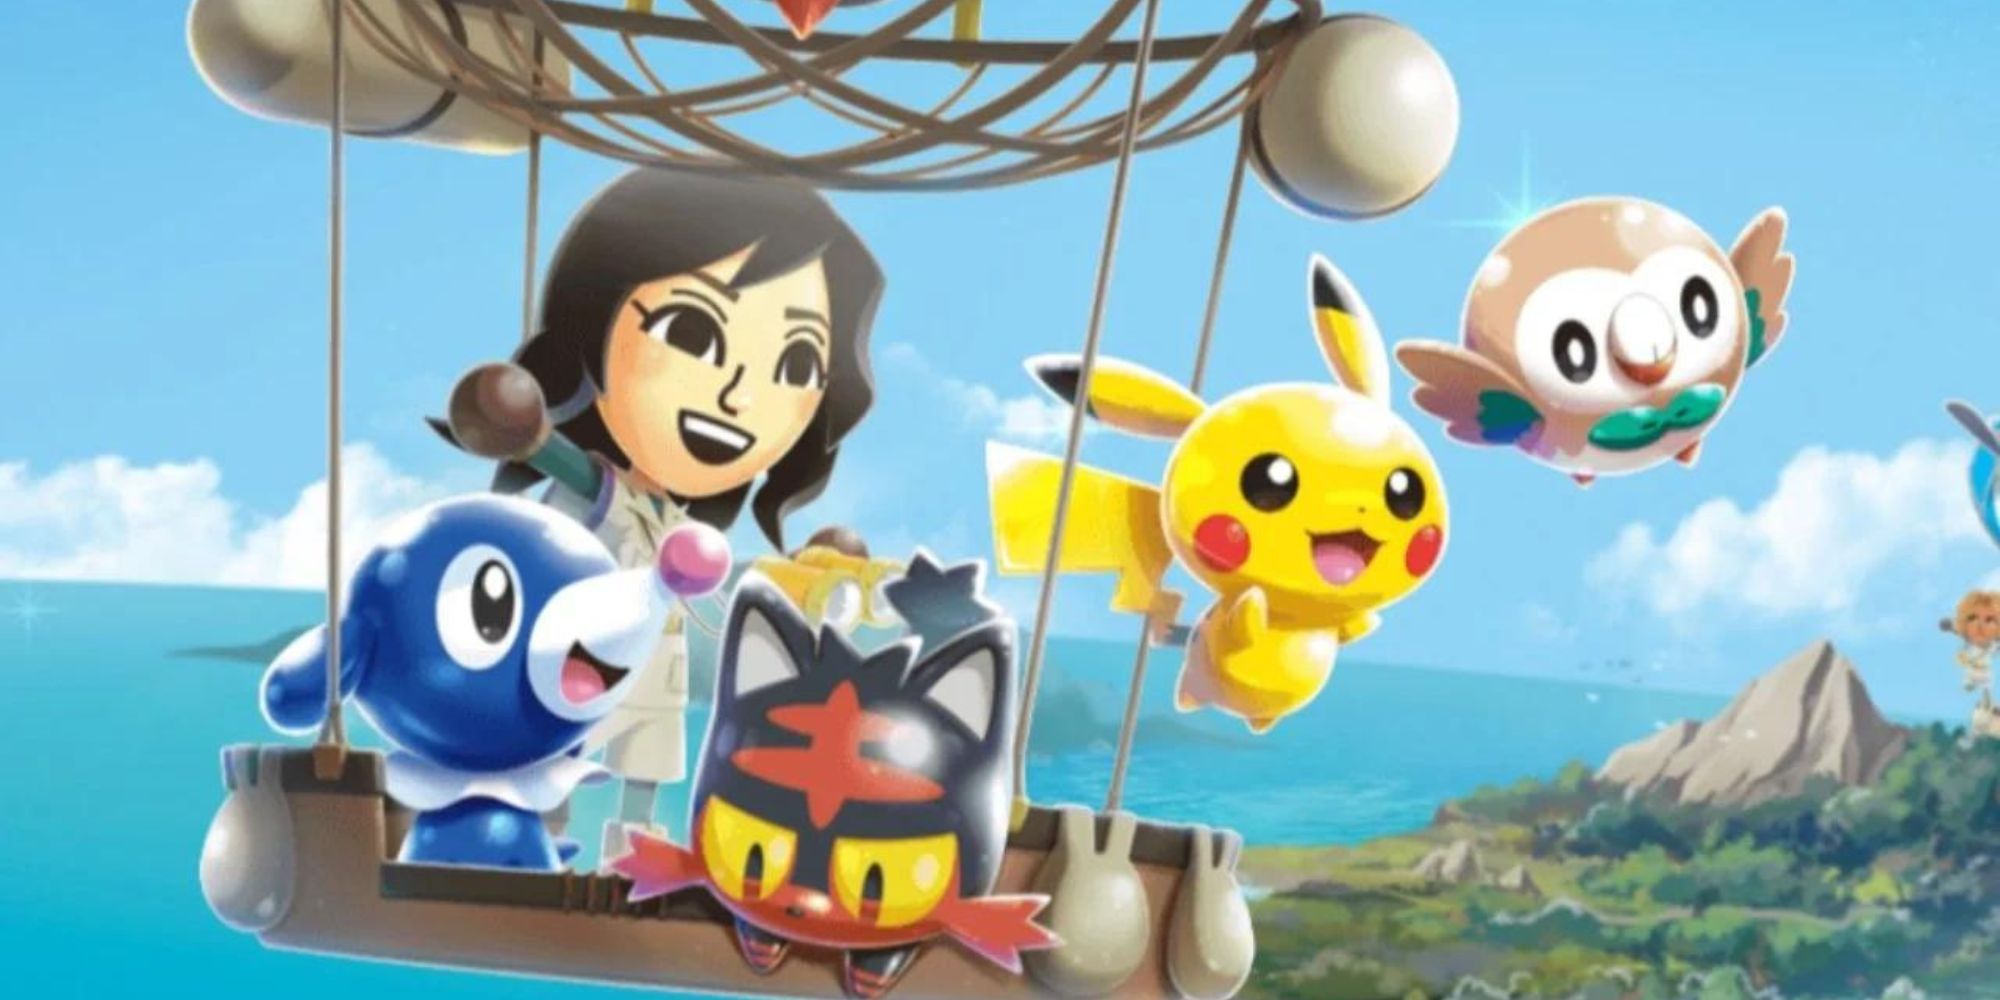 A trainer stands in a hot air balloon with Pikachu, Litten, Rowlet, and Popplio